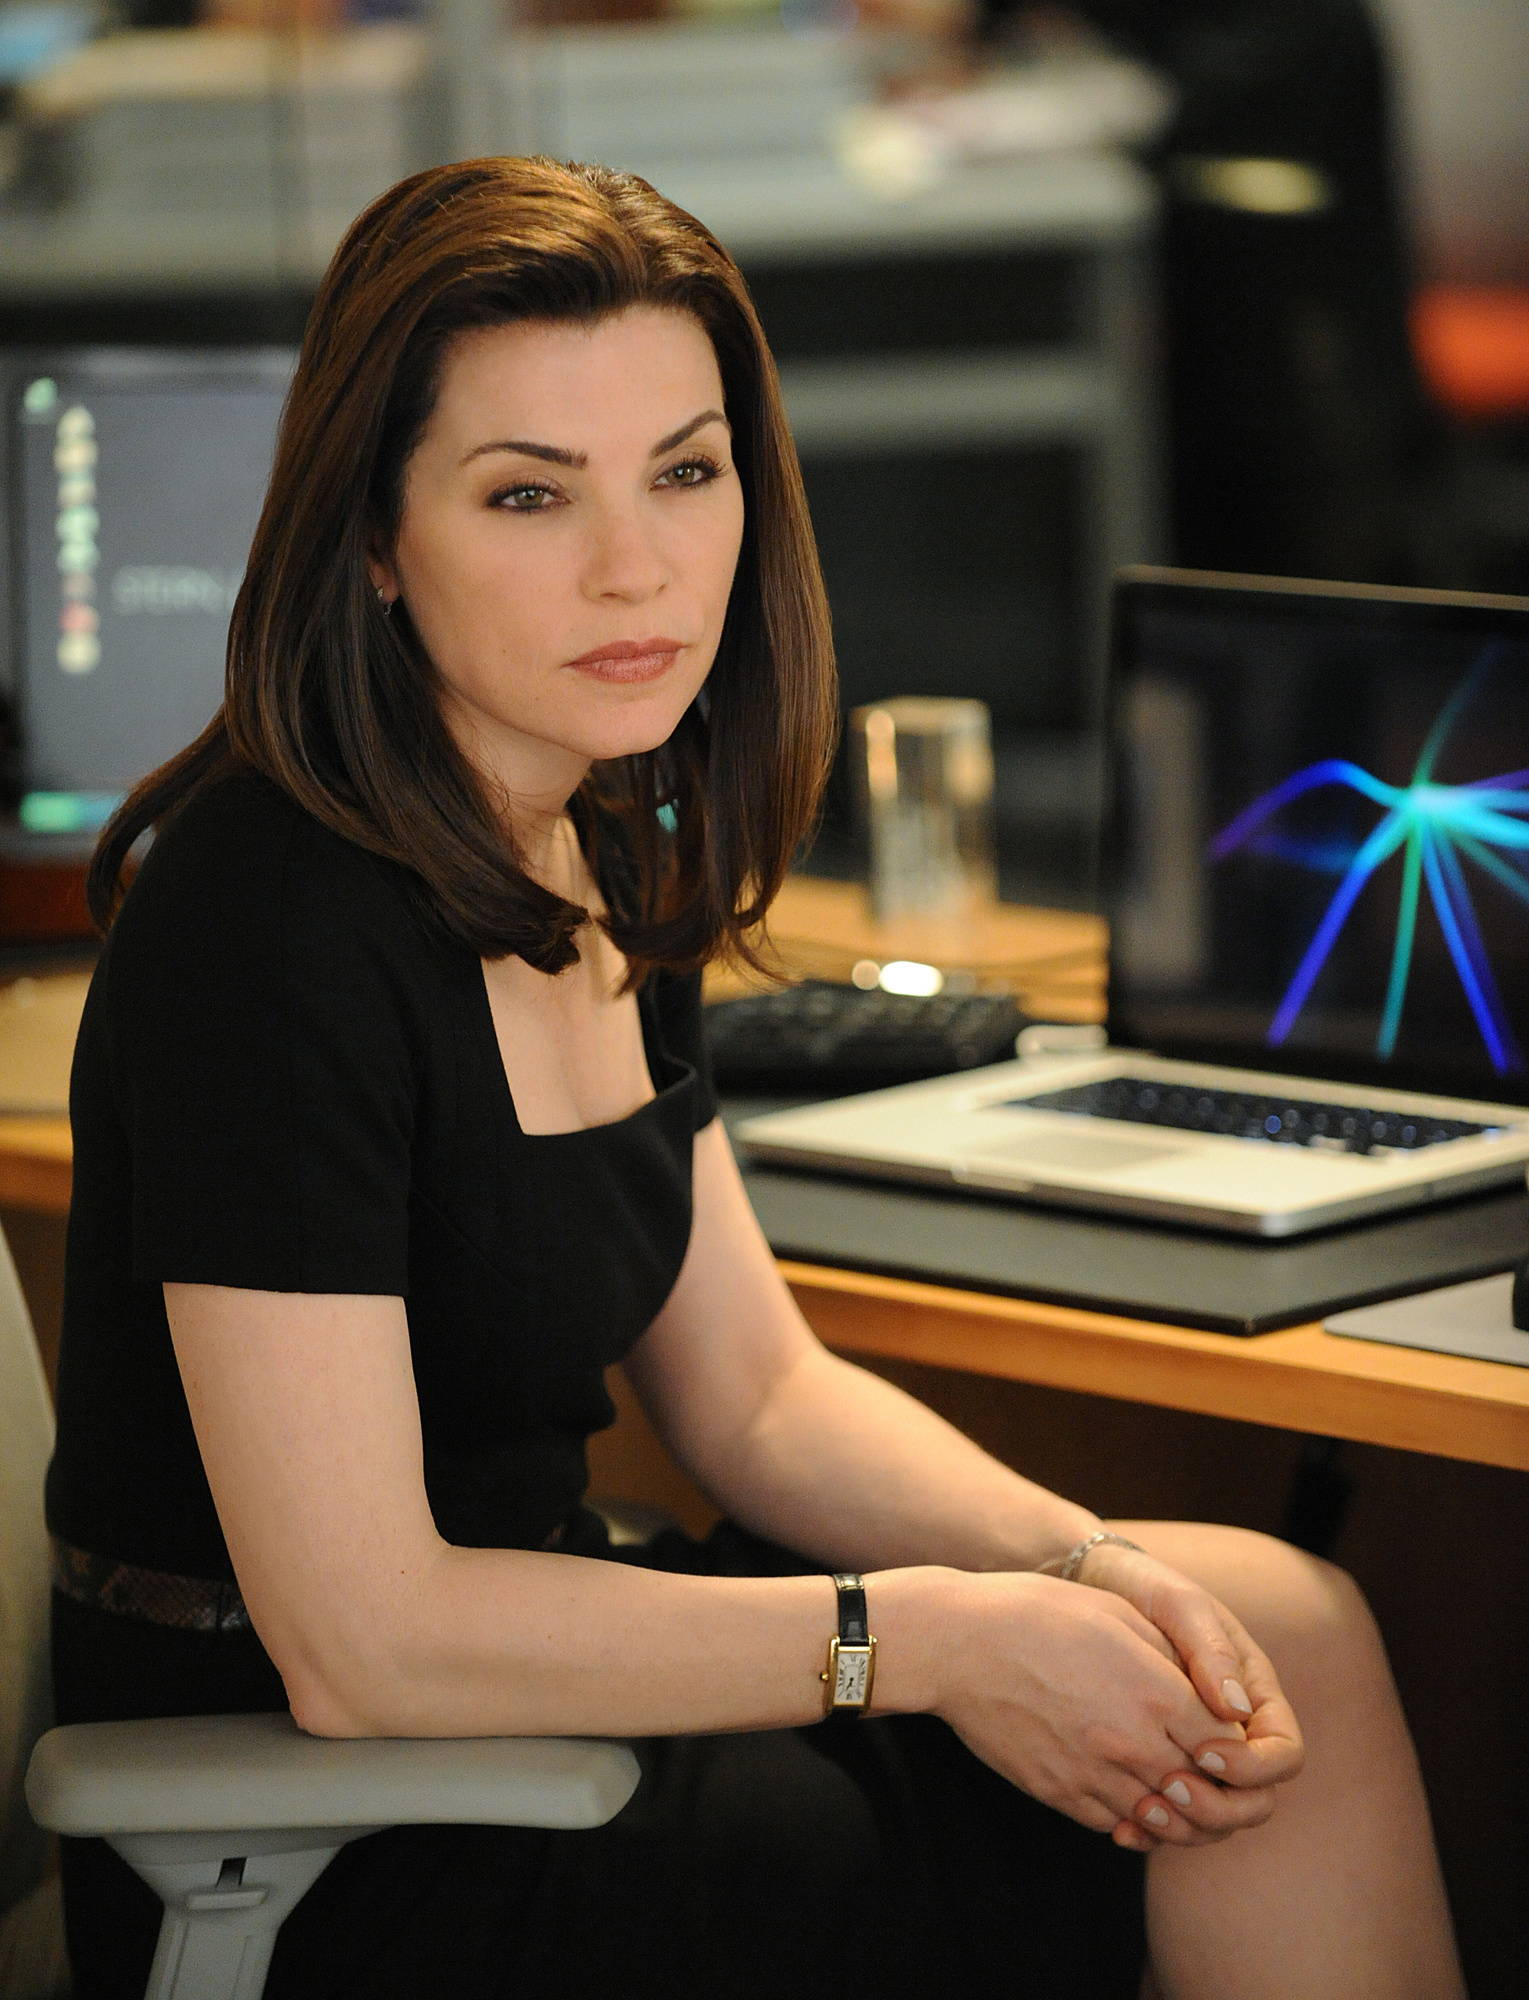 The Good Wife (TV Series): Julianna Margulies, Film debut playing a small part in the 1991 Steven Seagal's “Out for Justice”. 1530x2000 HD Wallpaper.